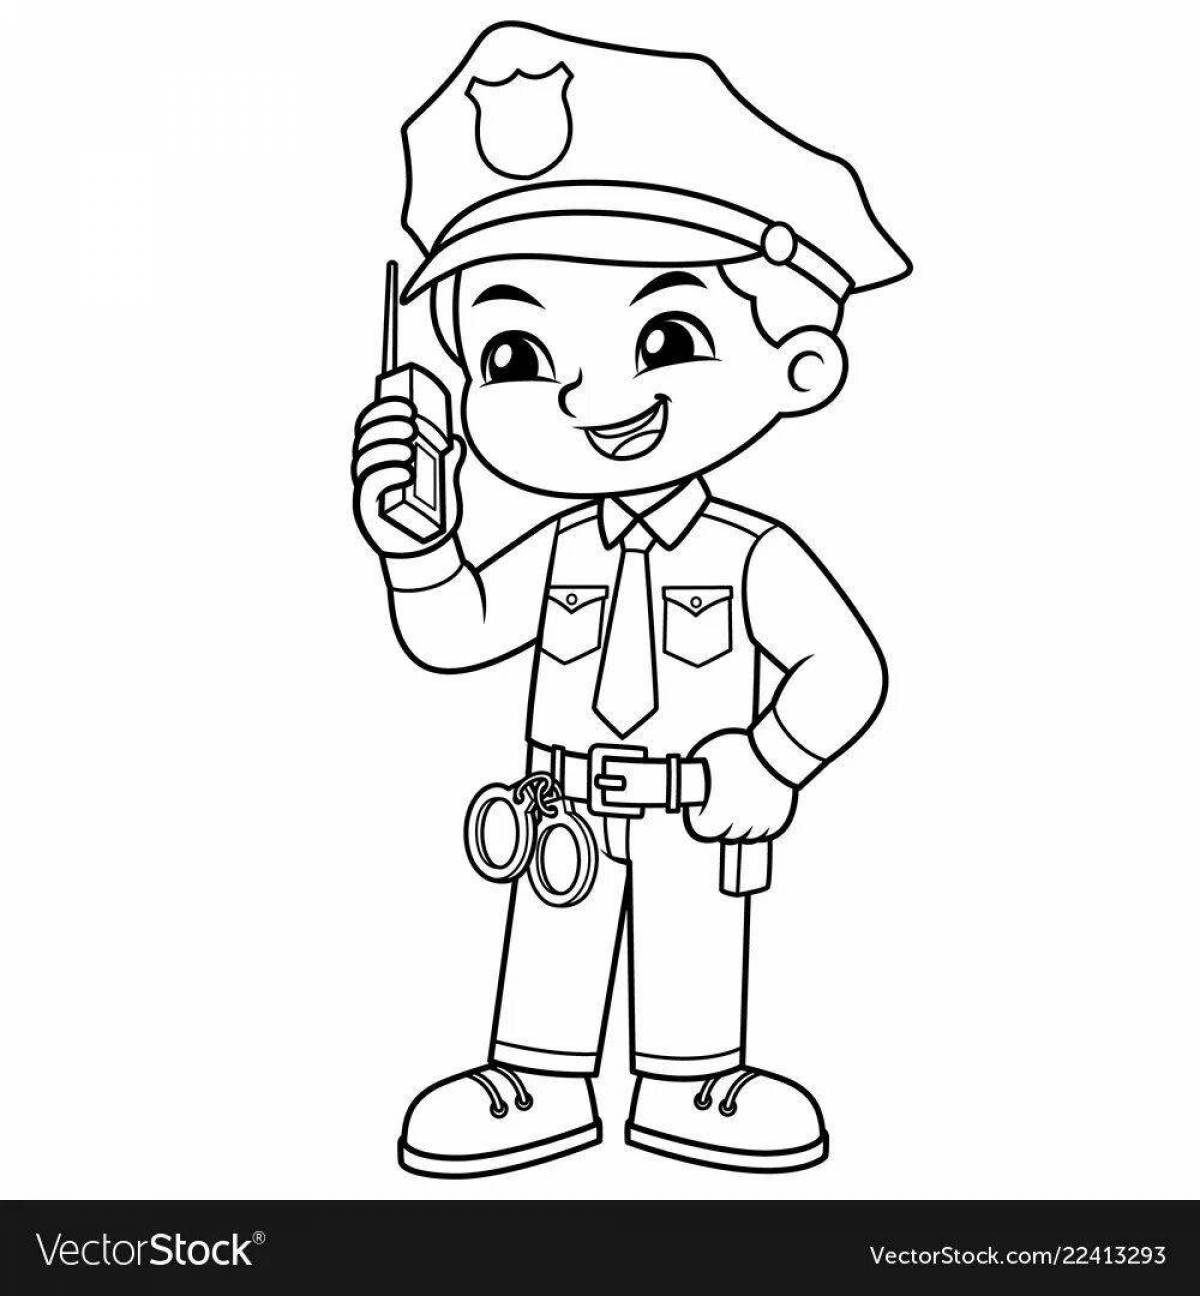 Coloring page brave policeman